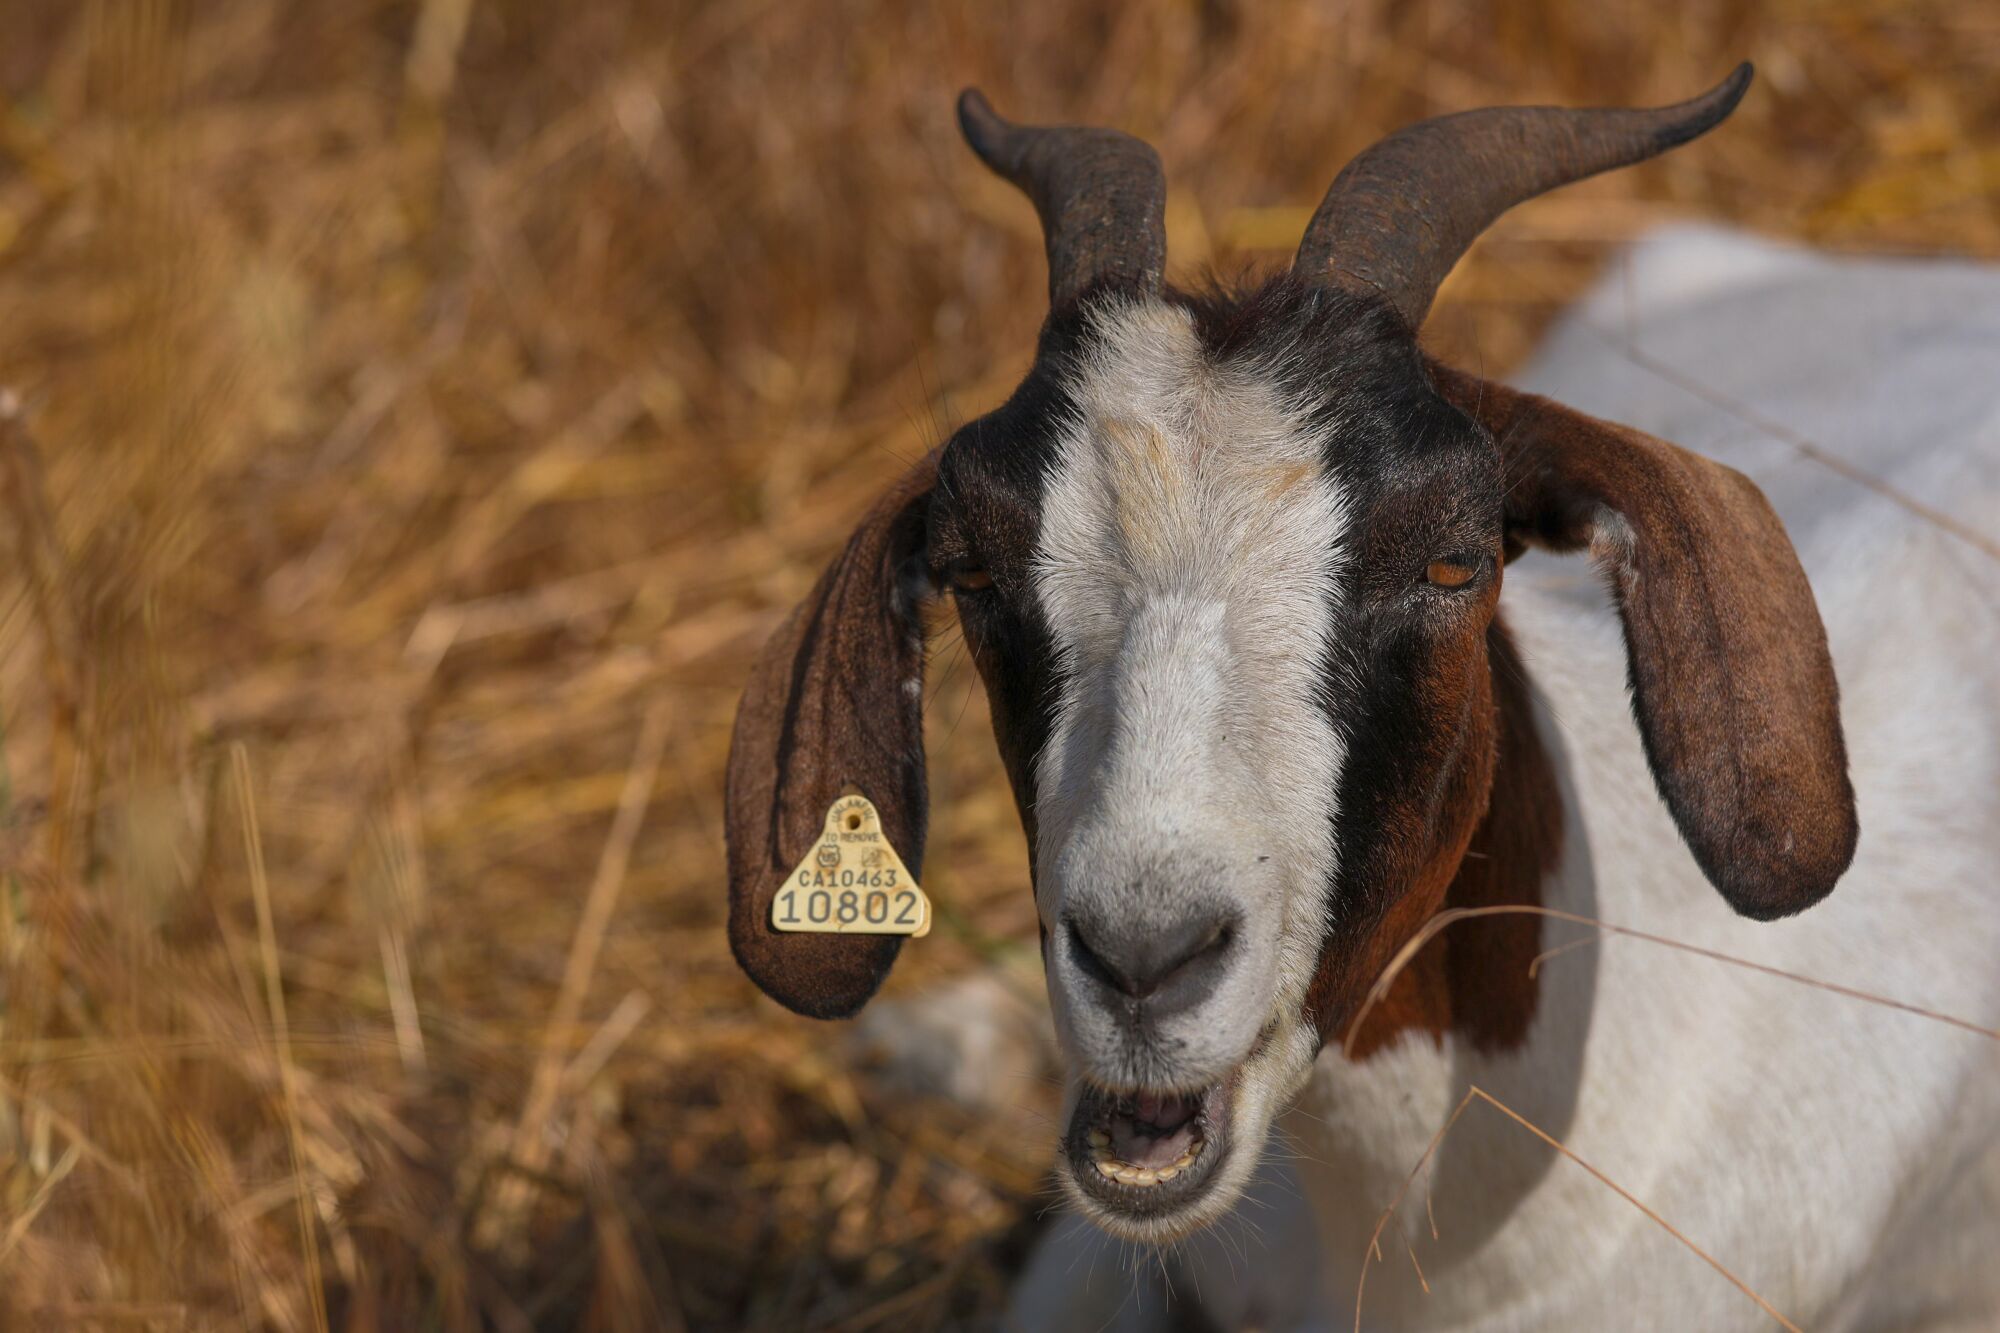 A goat with a tag on his ear faces the camera.